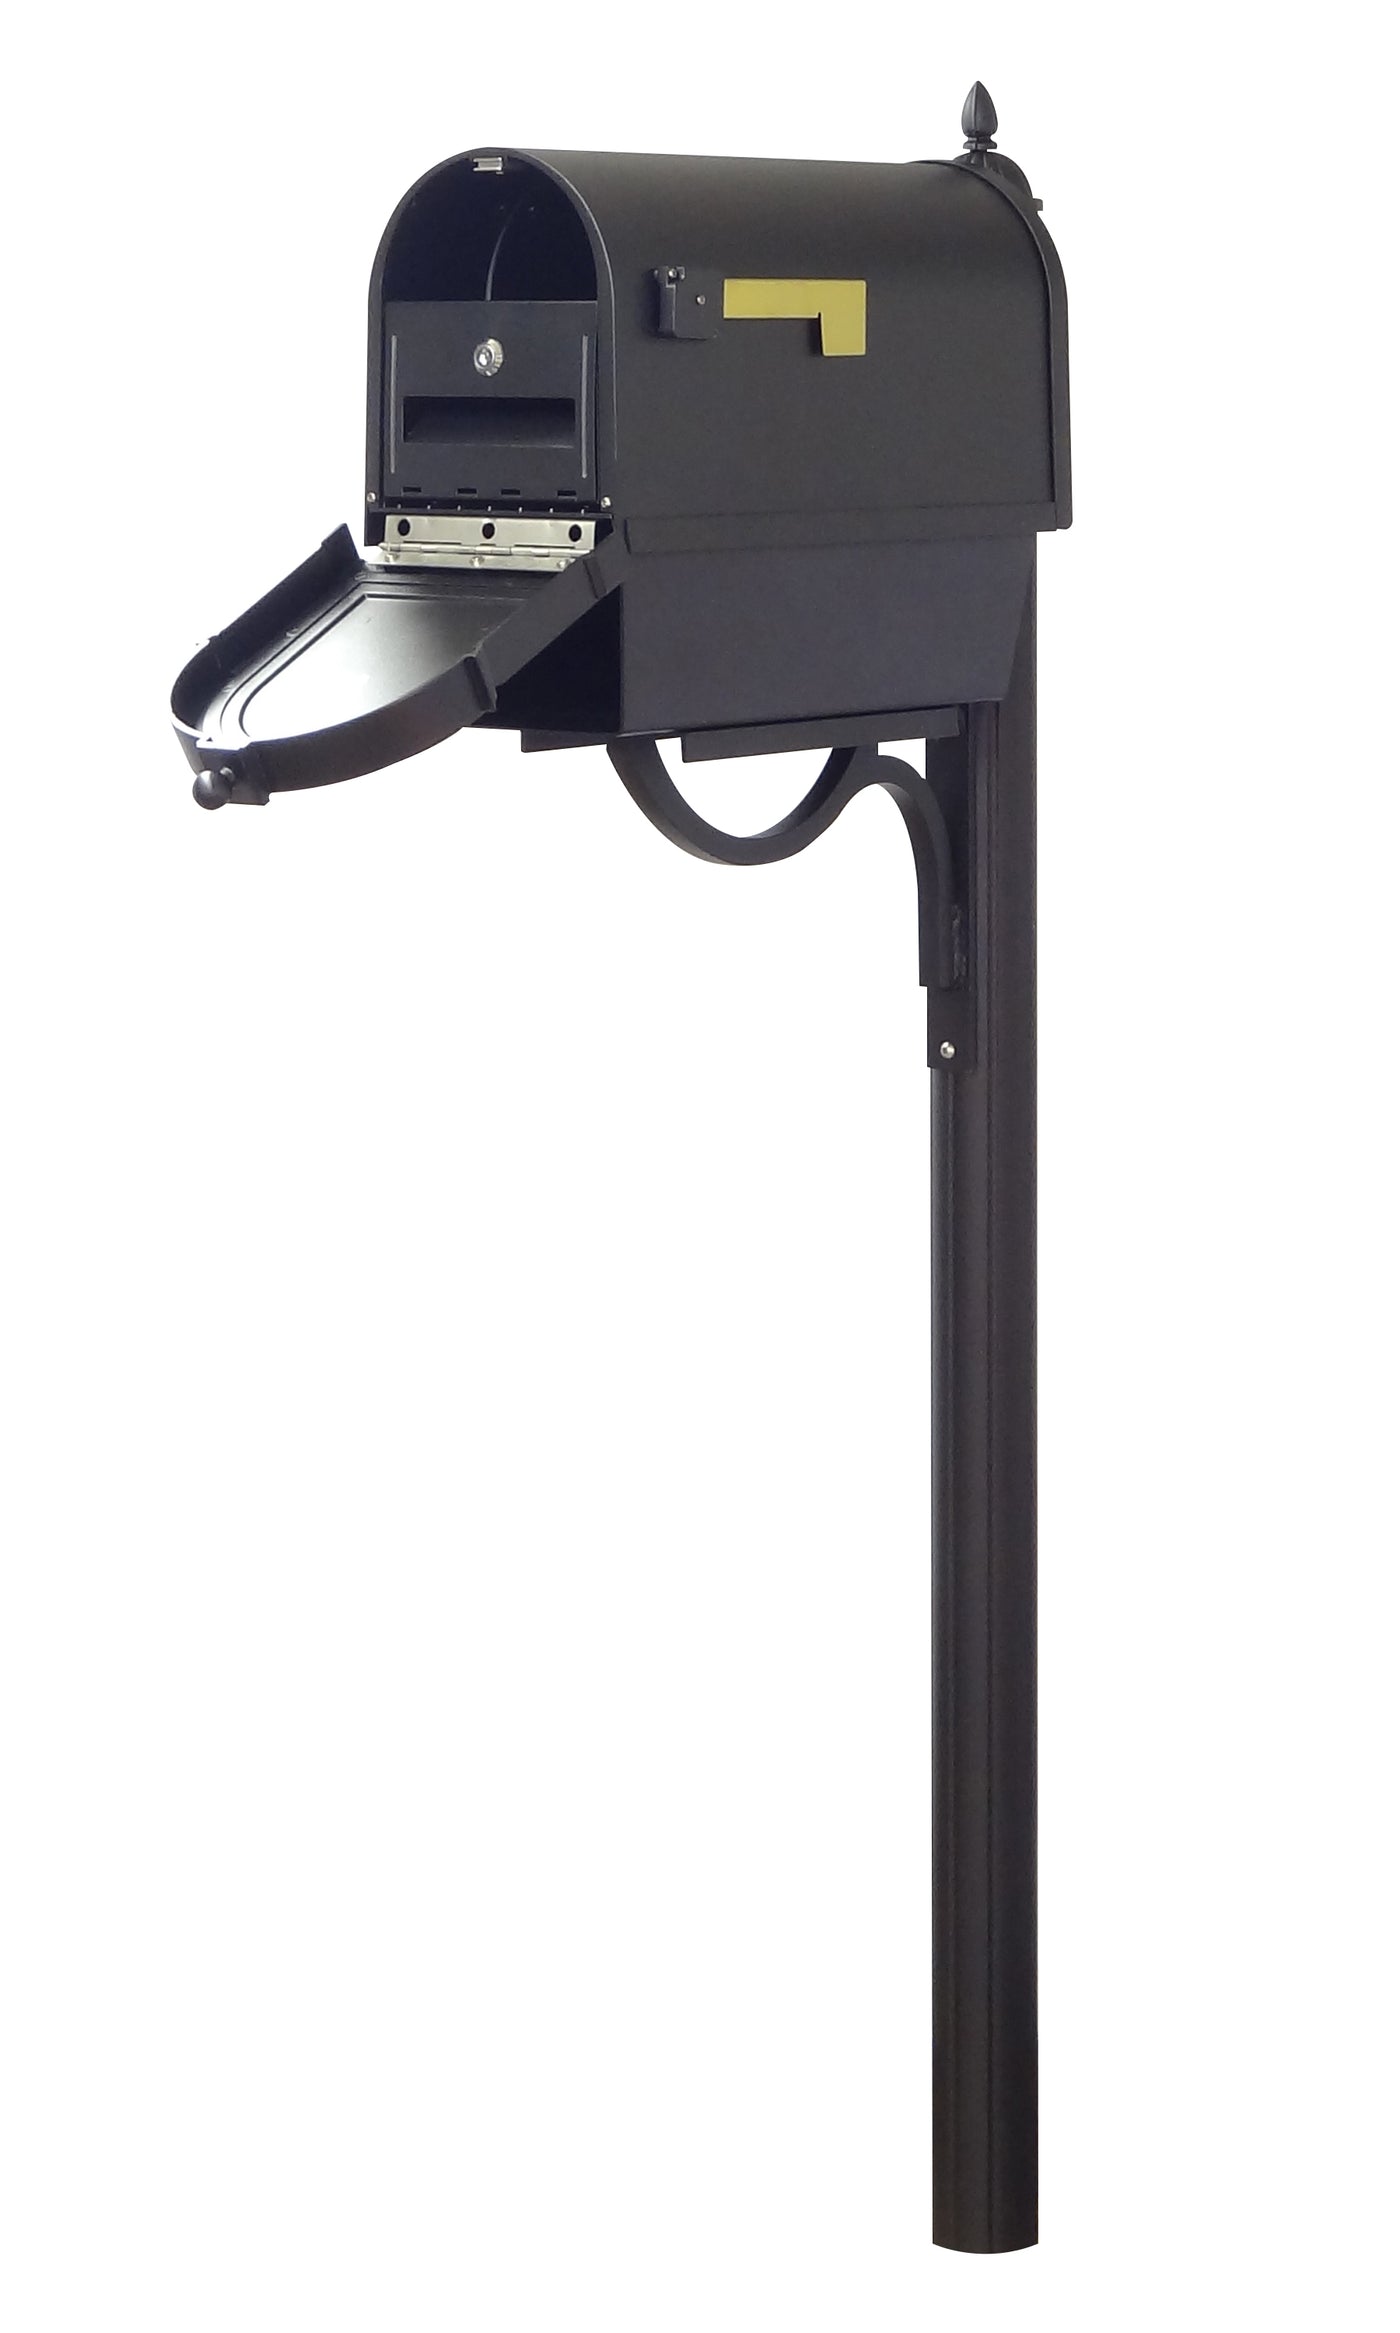 Berkshire Curbside Mailbox with Newspaper Tube, Locking Insert and Richland Mailbox Post